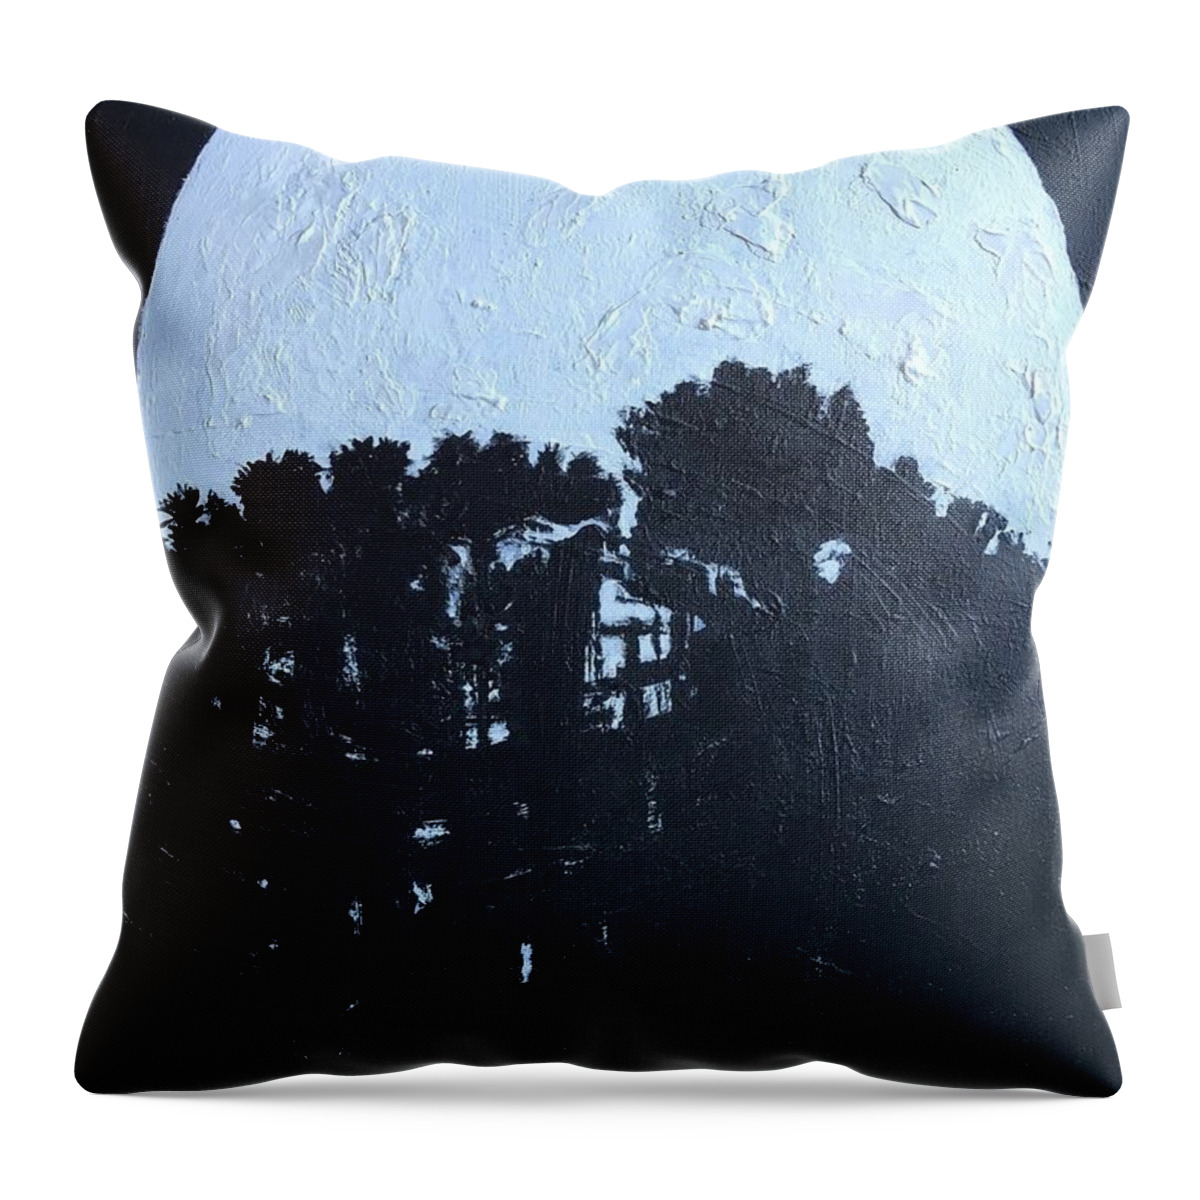 Moon Throw Pillow featuring the painting December 21st by Medge Jaspan